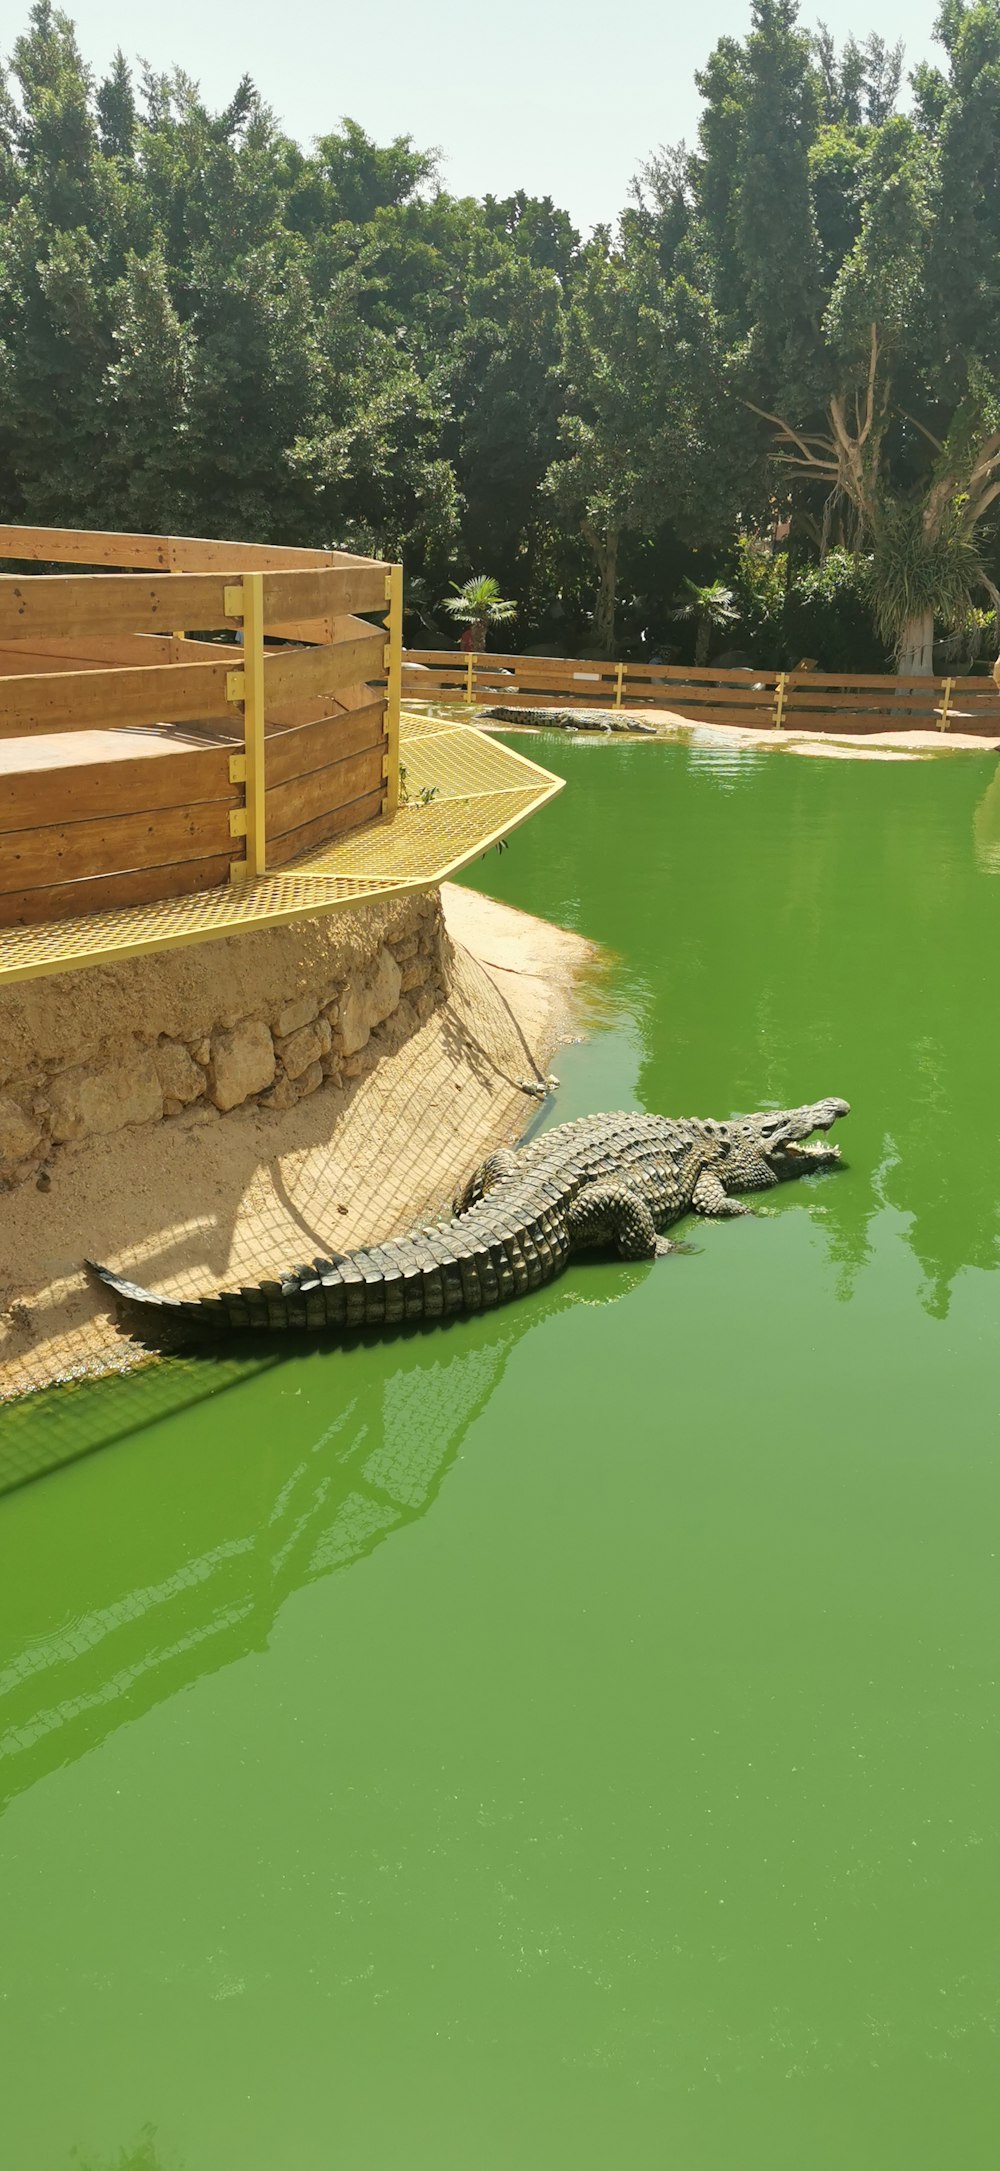 a crocodile in a body of water